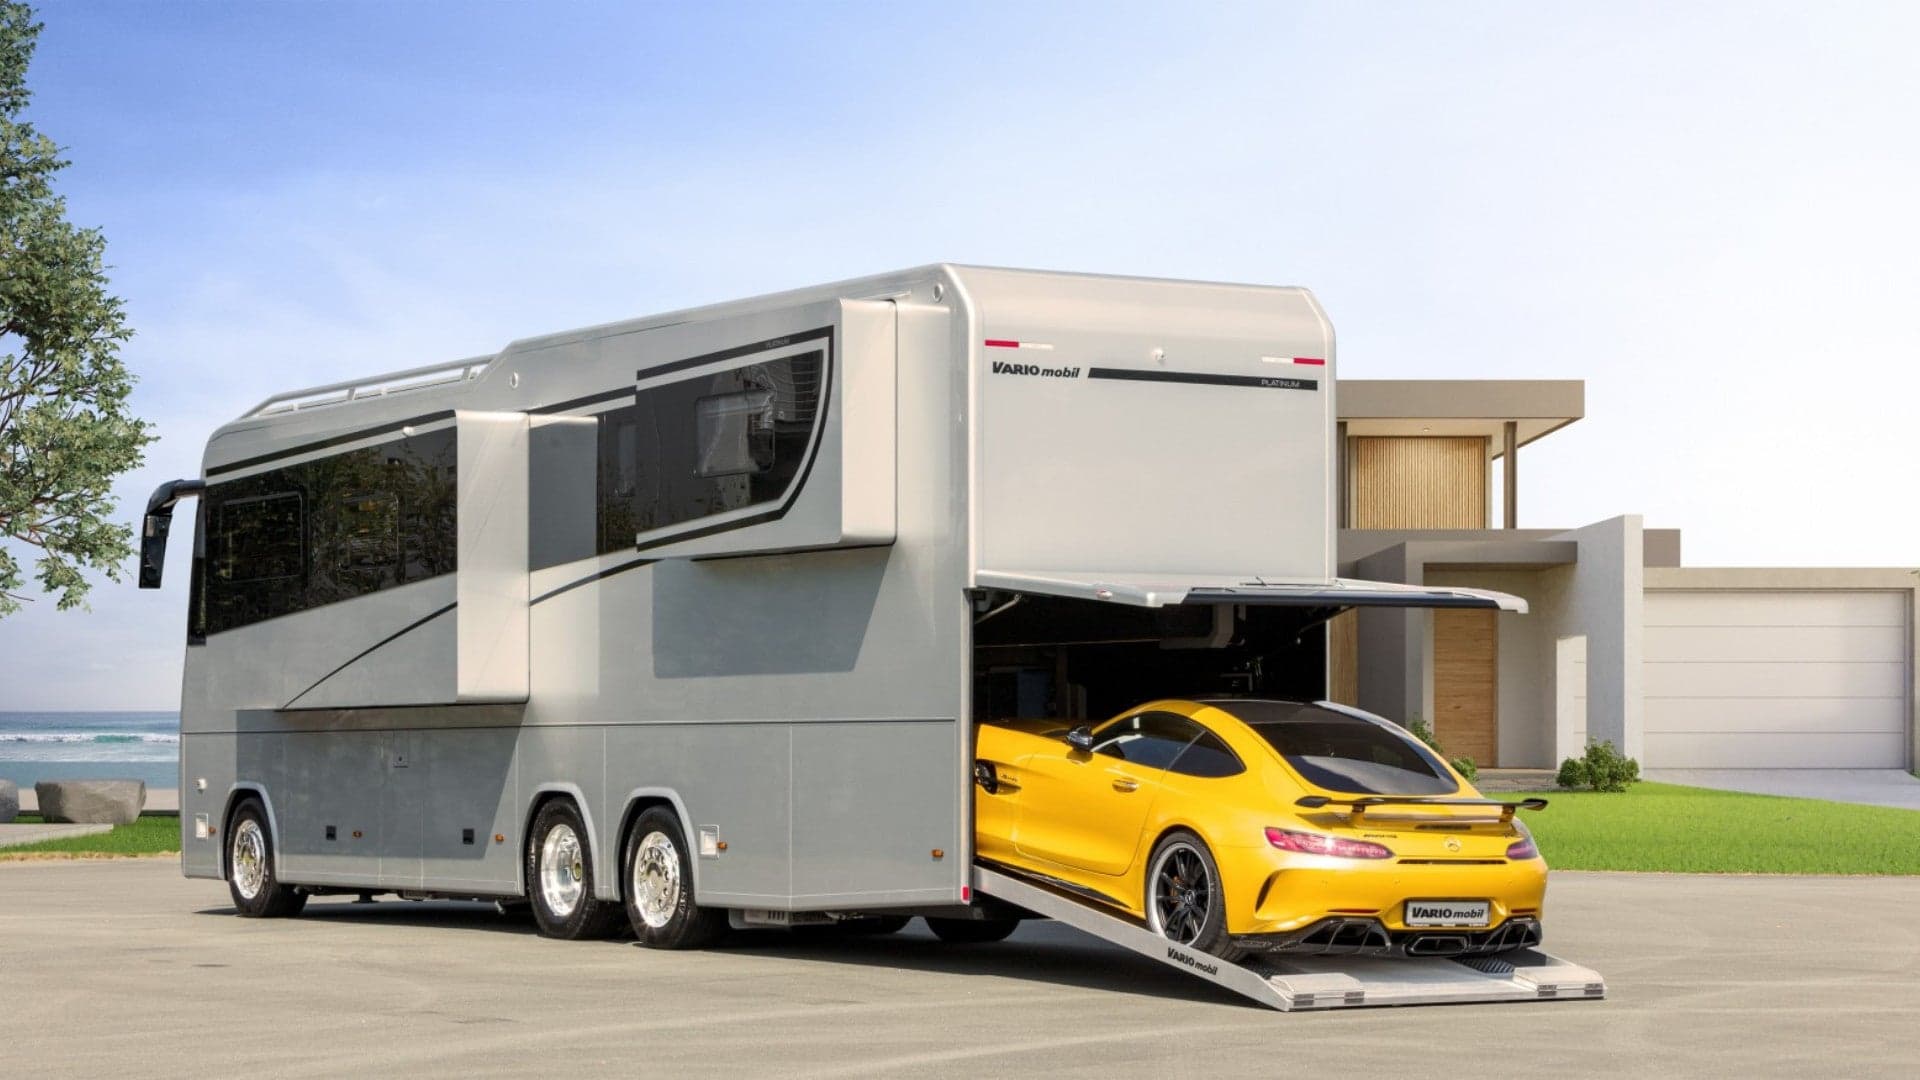 This $1.8 Million Motorhome is a Luxury Carrying Case for Your GT Sports Car